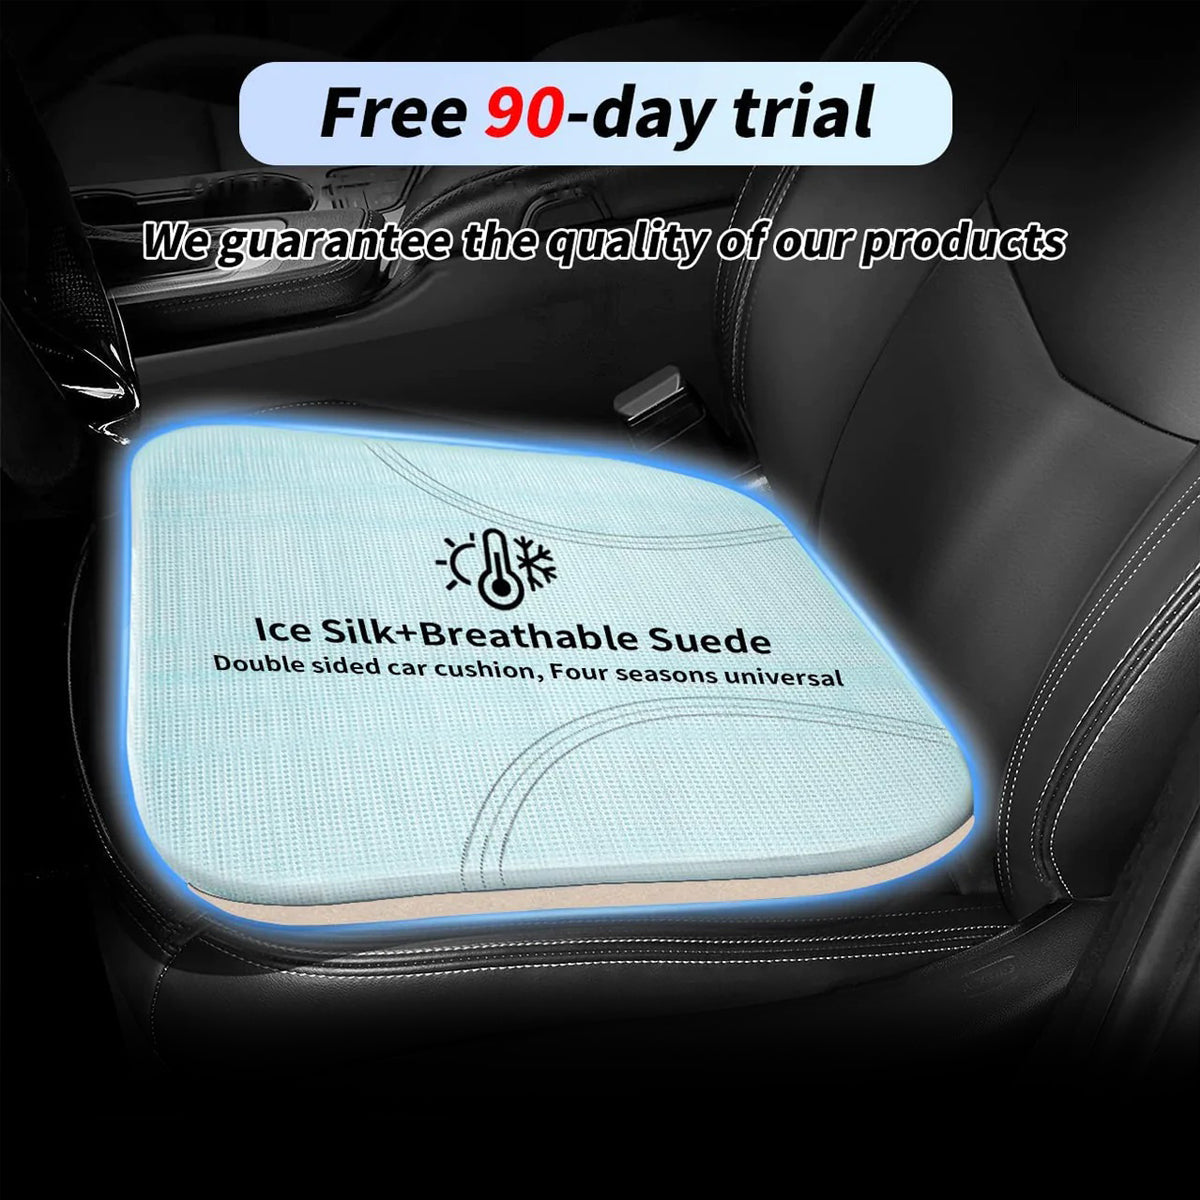 Car Seat Cushion, Custom For Cars, Car Memory Foam Seat Cushion, Heightening Seat Cushion, Seat Cushion for Car and Office Chair MA19999 - Delicate Leather